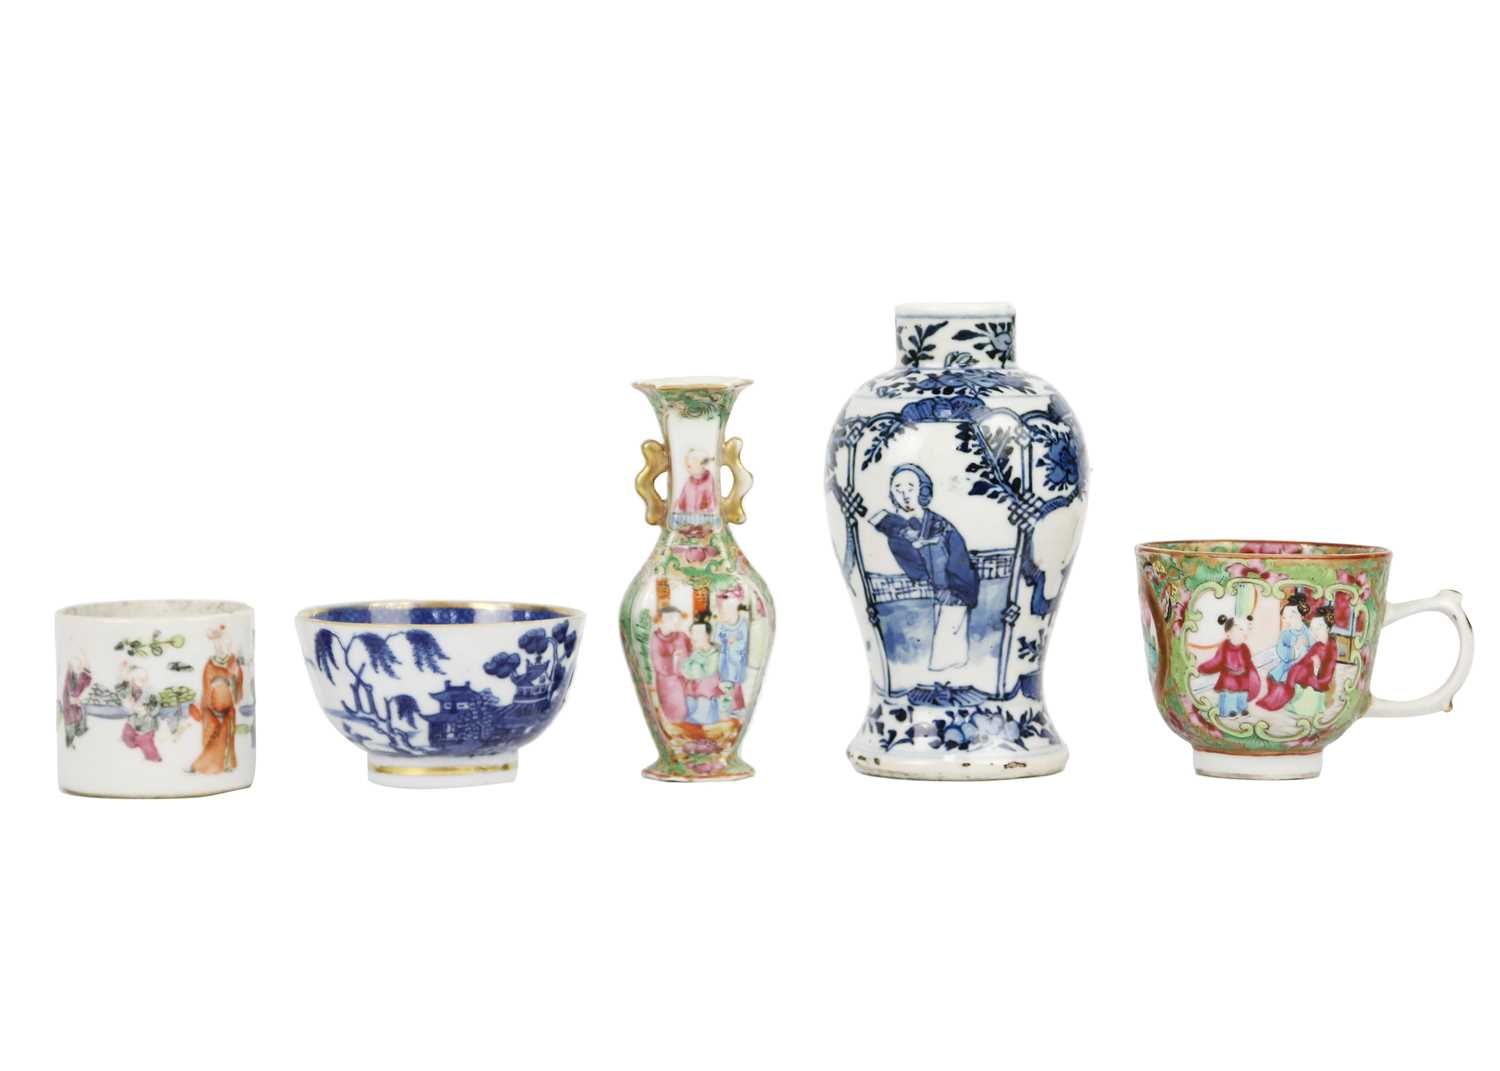 A quantity of Chinese Canton and other porcelain items, 19th century. - Image 5 of 6